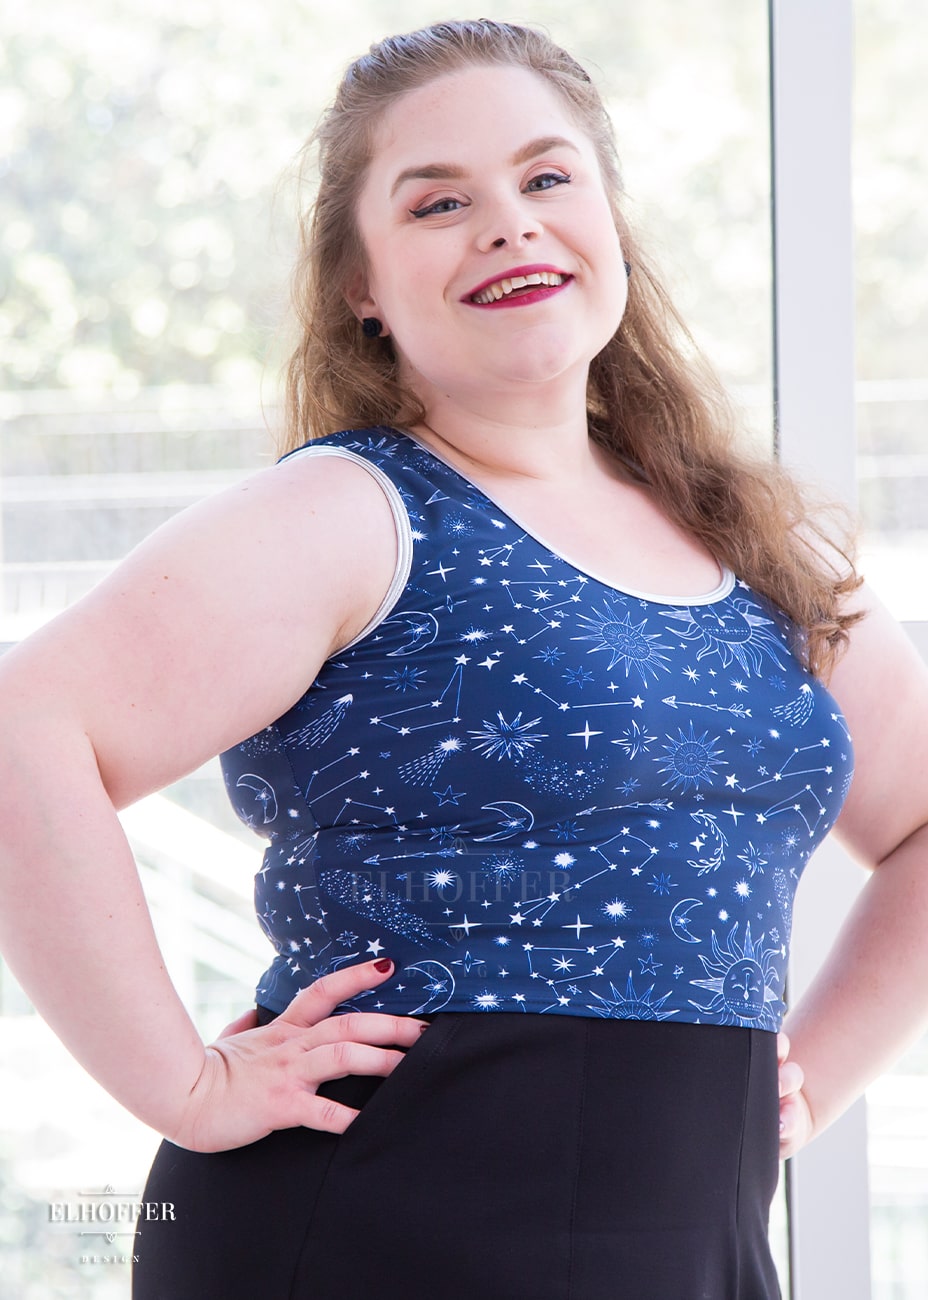 Lucy, a size large fair skinned model with long  dark brown hair, is wearing a low scoop neckline sleeveless crop top with silver metallic foldover binding at the neck and armholes, wide shoulder straps, fitted throughout the body, and ending at the natural waist in our star crossed lovers print. The Star-Crossed Lovers print is a celestial inspired pattern featuring a navy base and white stars, constellations, sunds, moons, and other small details scattered across the repeated art.